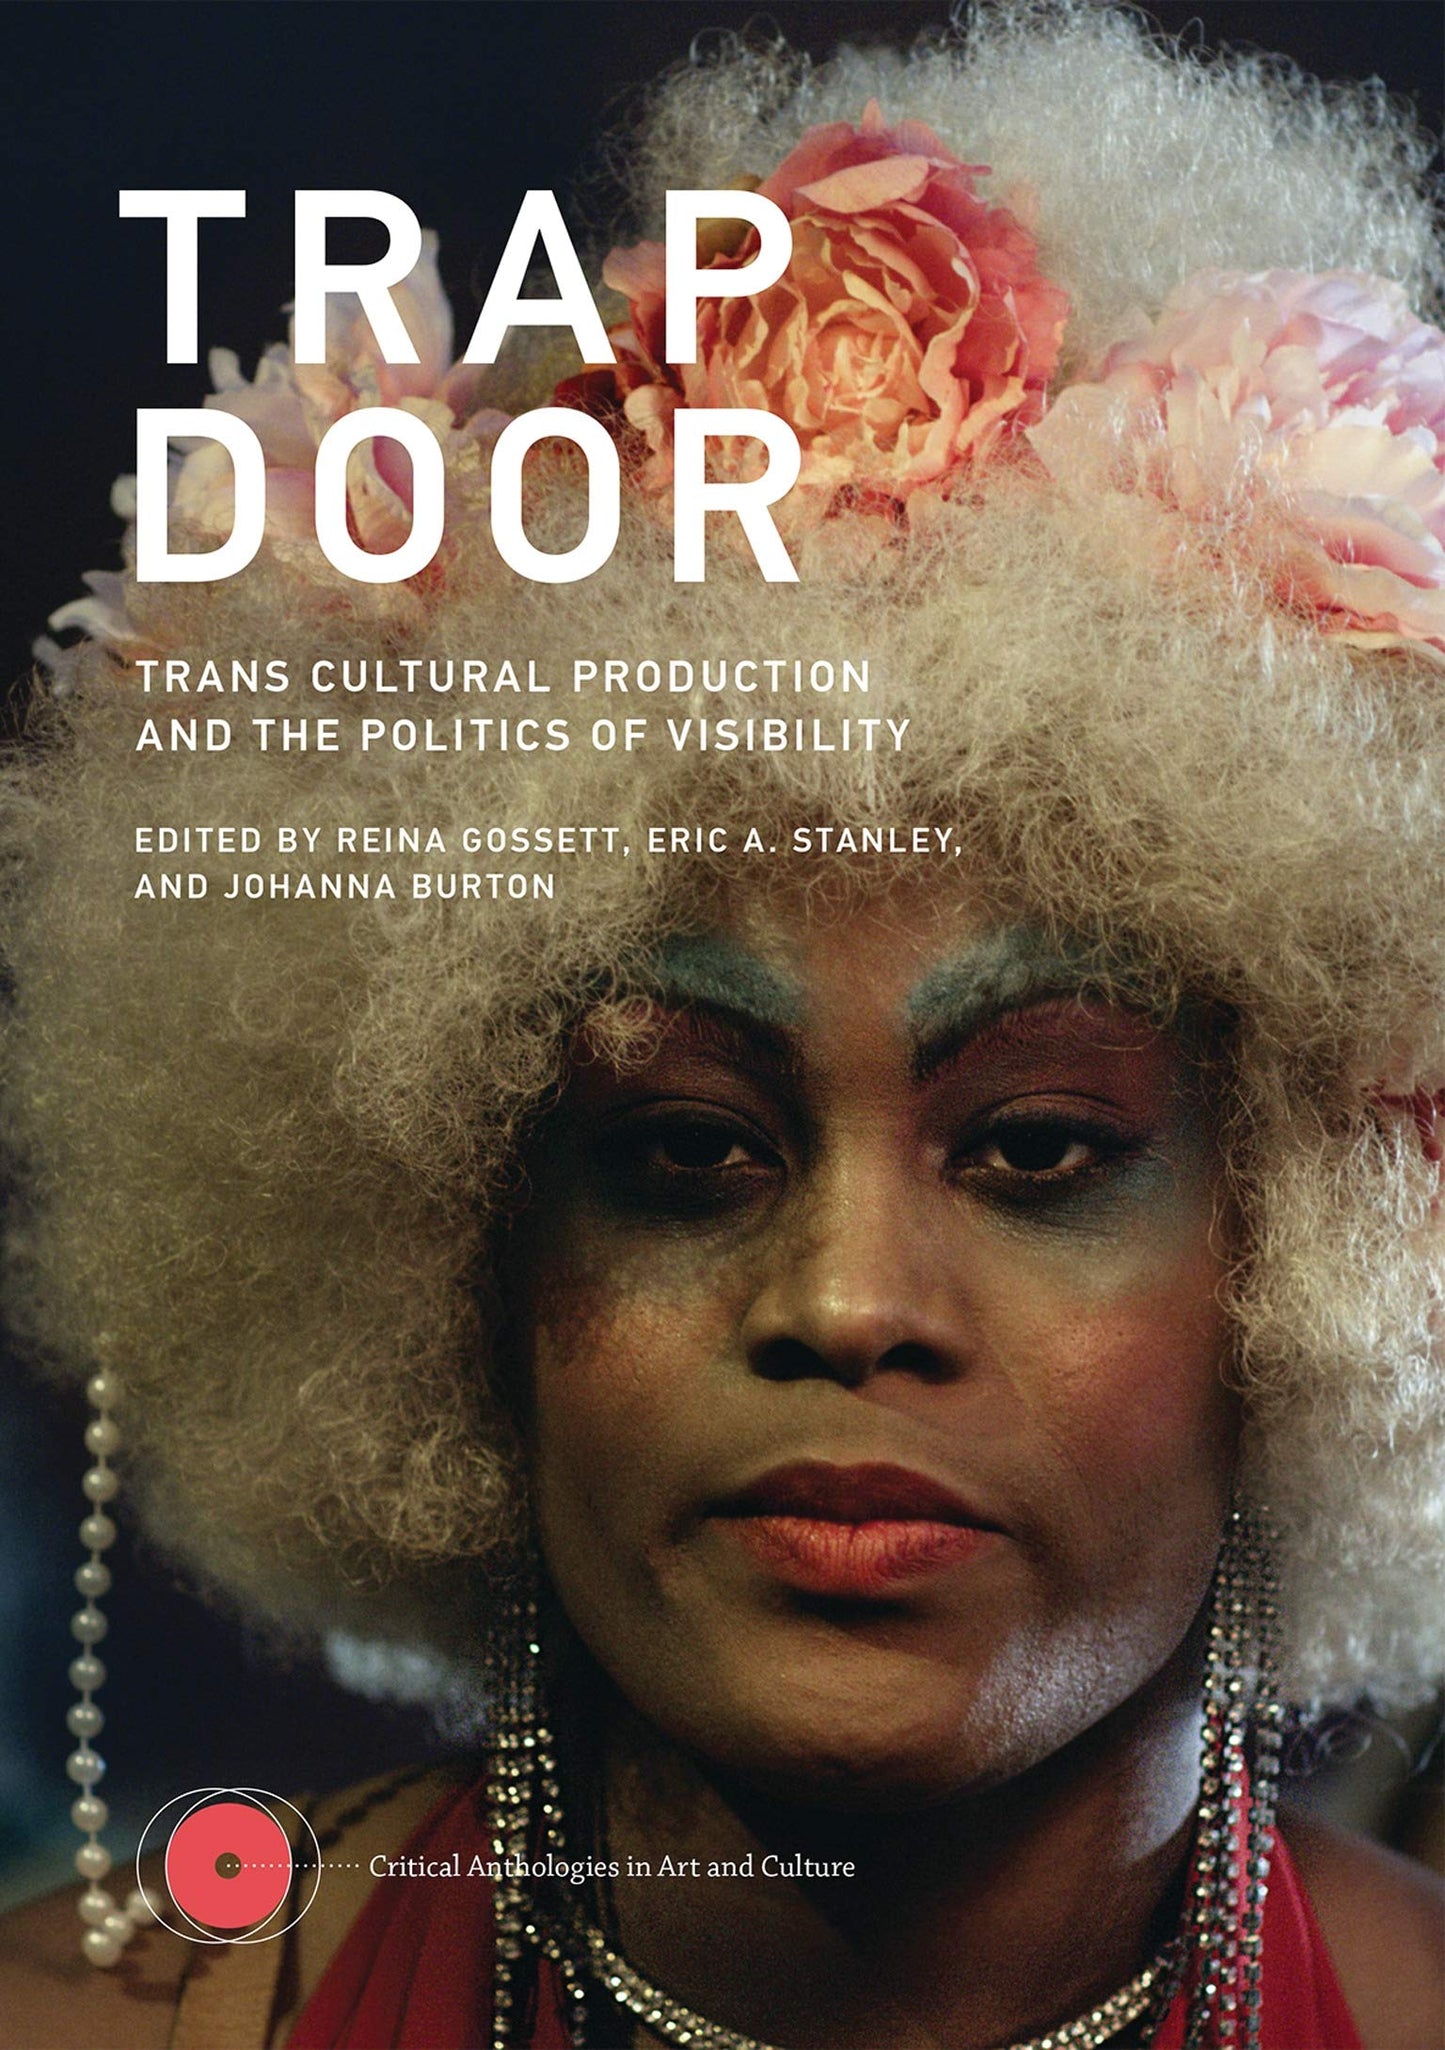 Trap Door // Trans Cultural Production and the Politics of Visibility